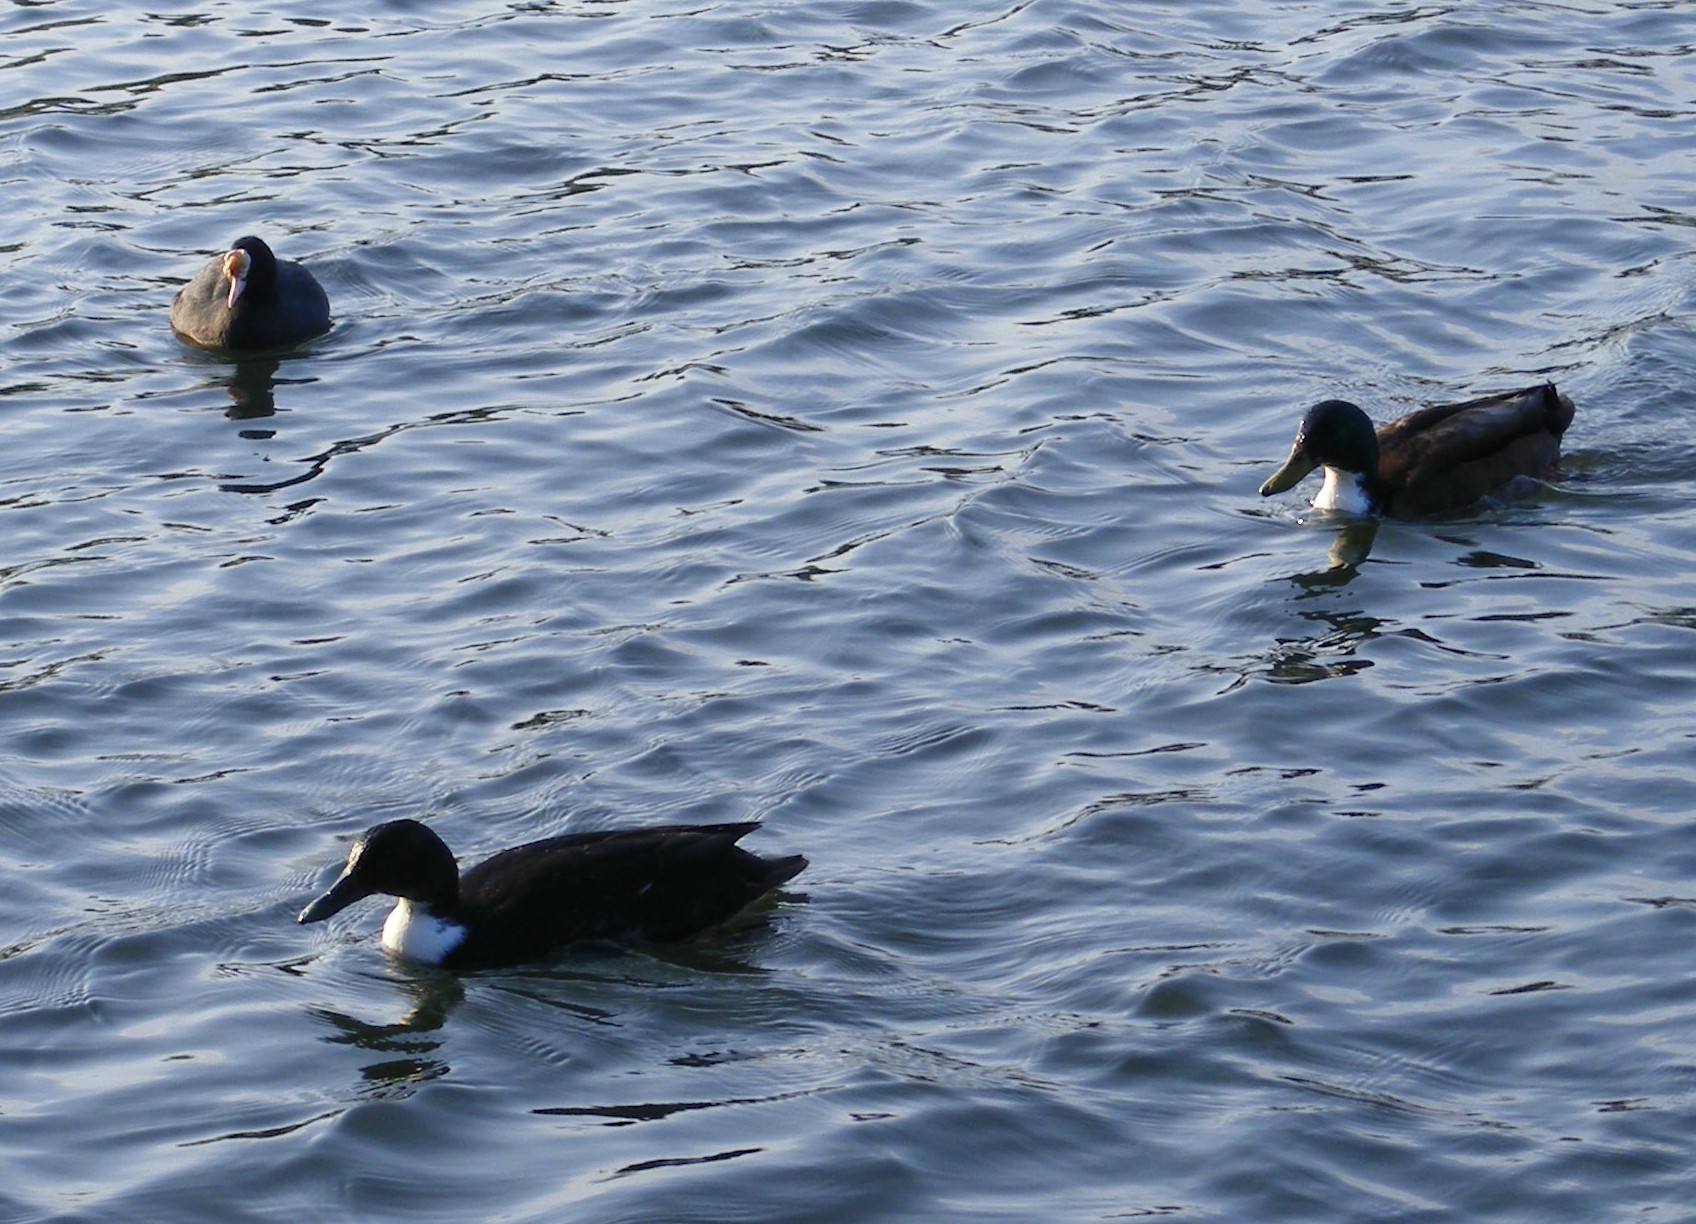 two ducks in the water one is brown and one is black